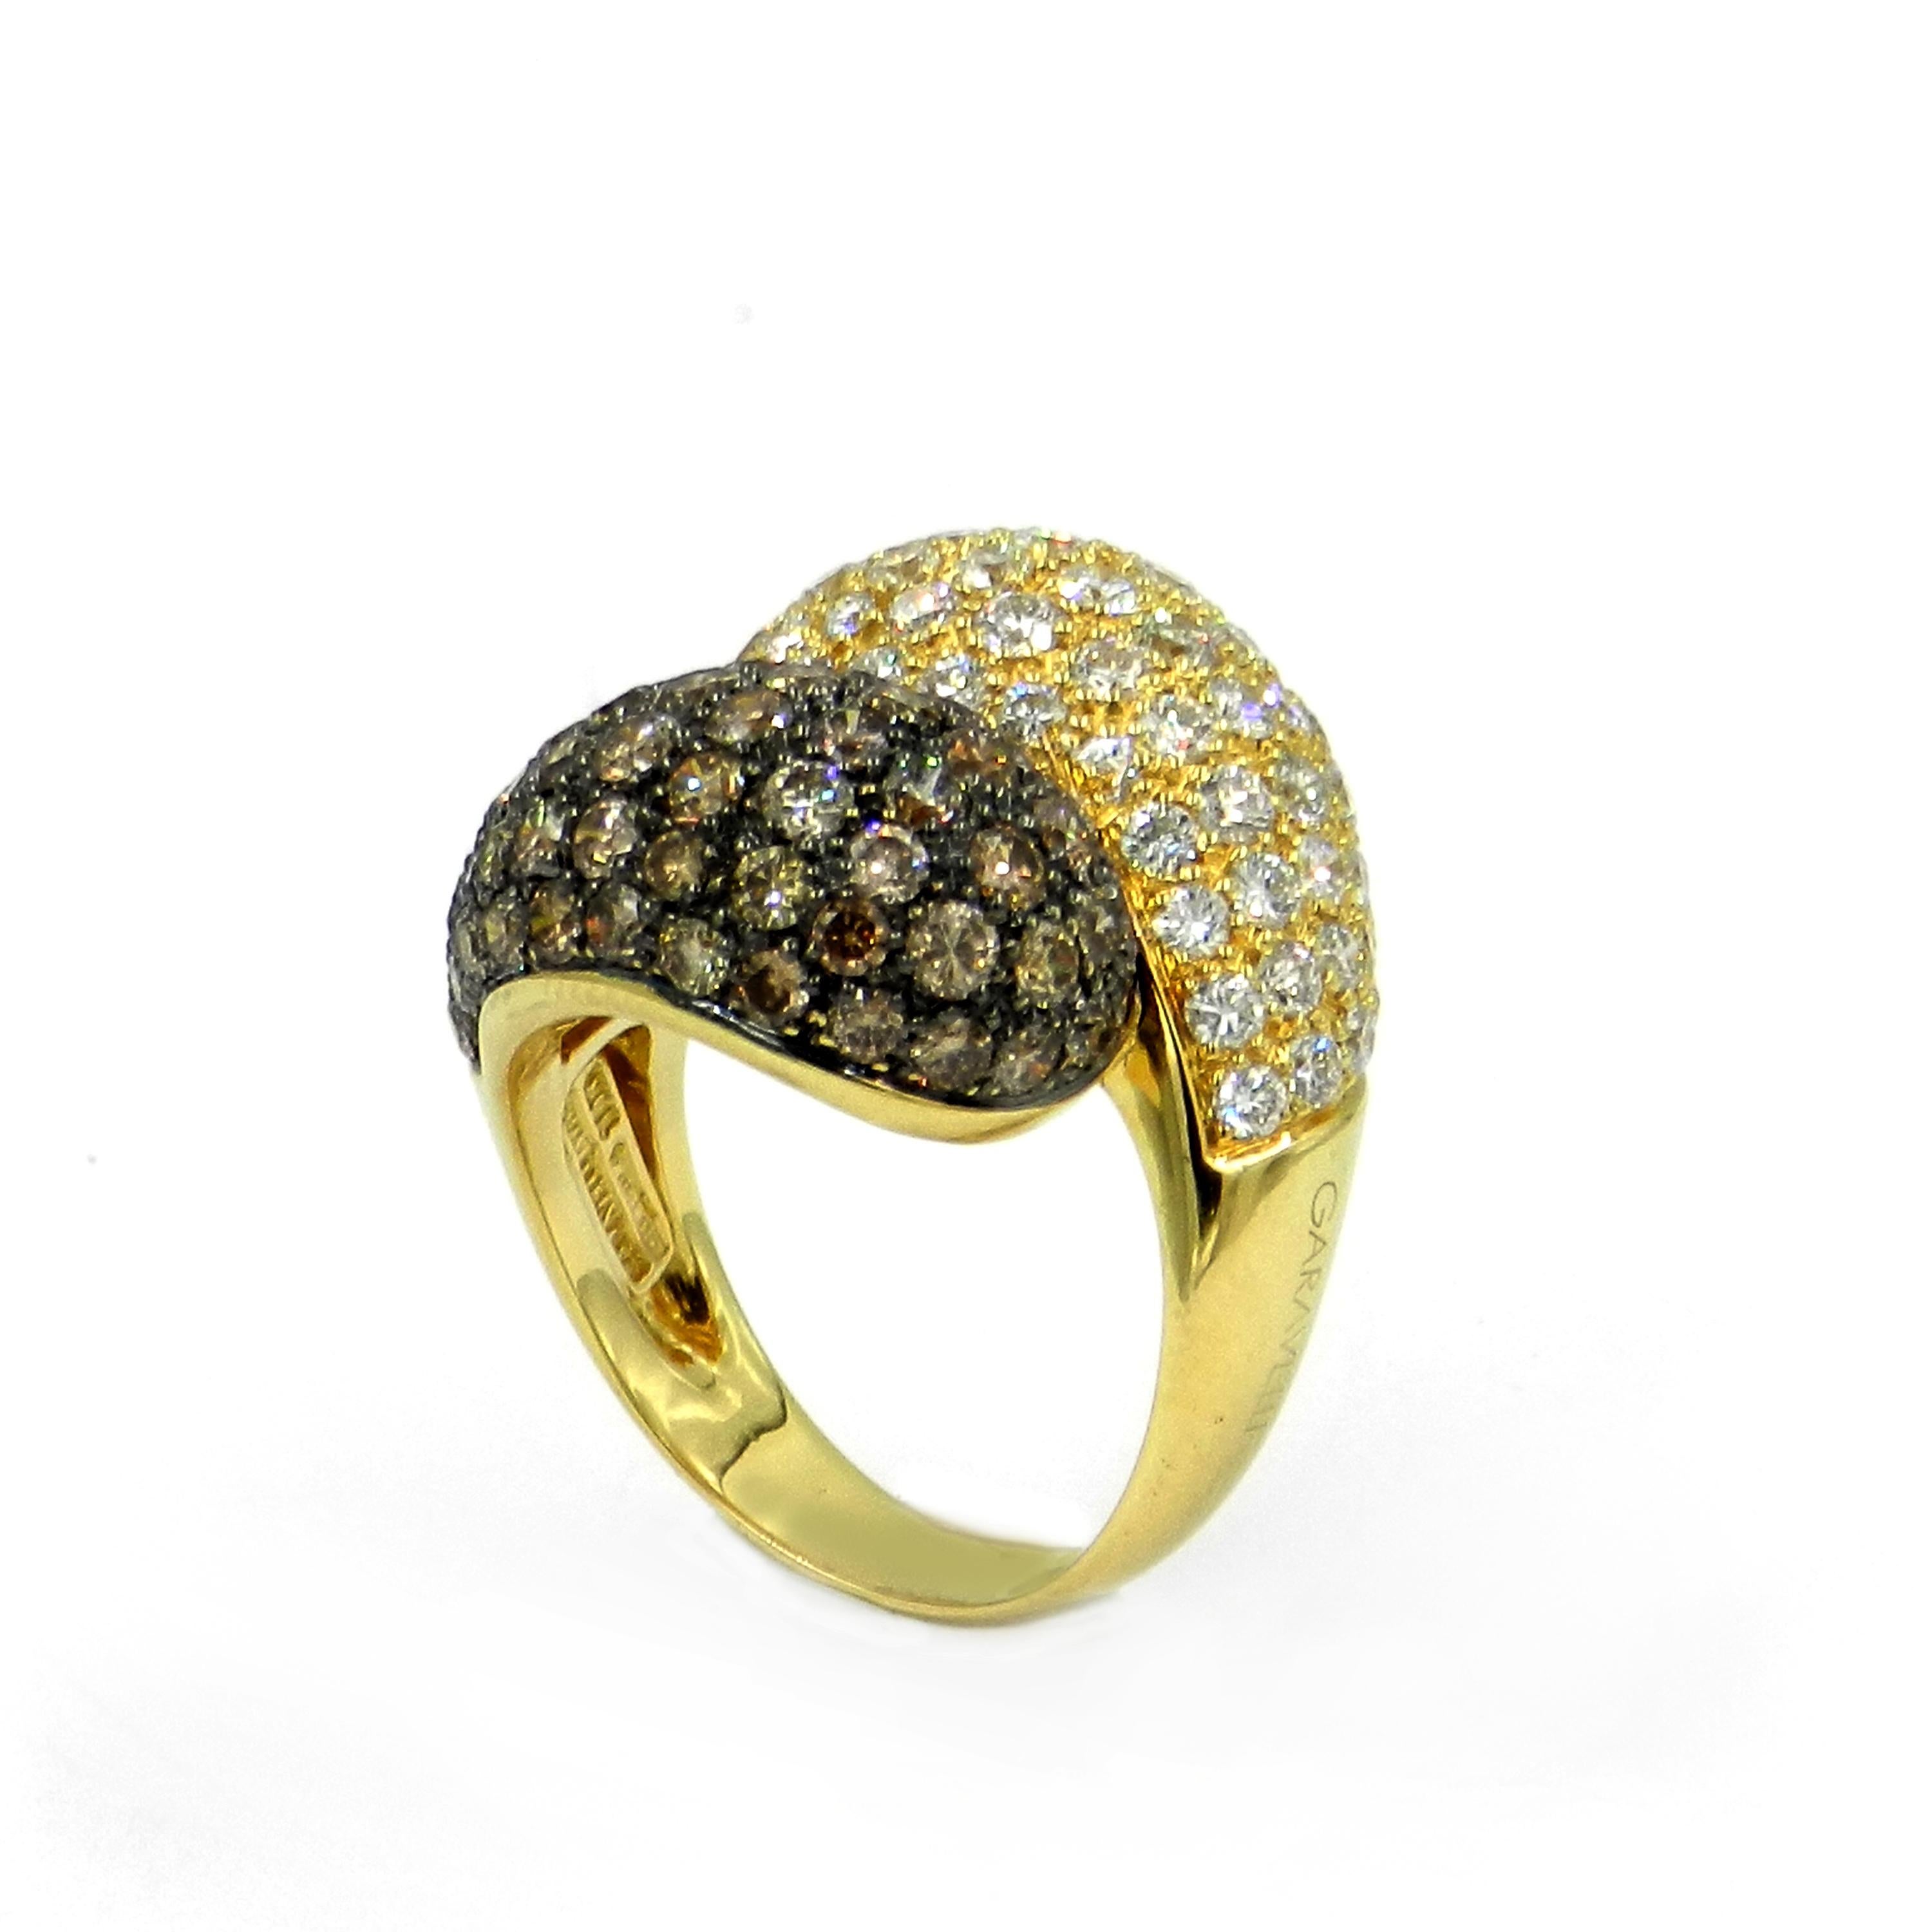 18 Karat Yellow Gold Brown and White Diamonds Pavè Contrarier Garavelli Ring  
Iconic Garavelli ring, made in Italy in Valenza
Finger size 54 1/2  -  US size 7 
18kt GOLD gr : 15,00
BROWN DIAMONDS ct : 2,47
WHITE DIAMONDS ct : 2,45